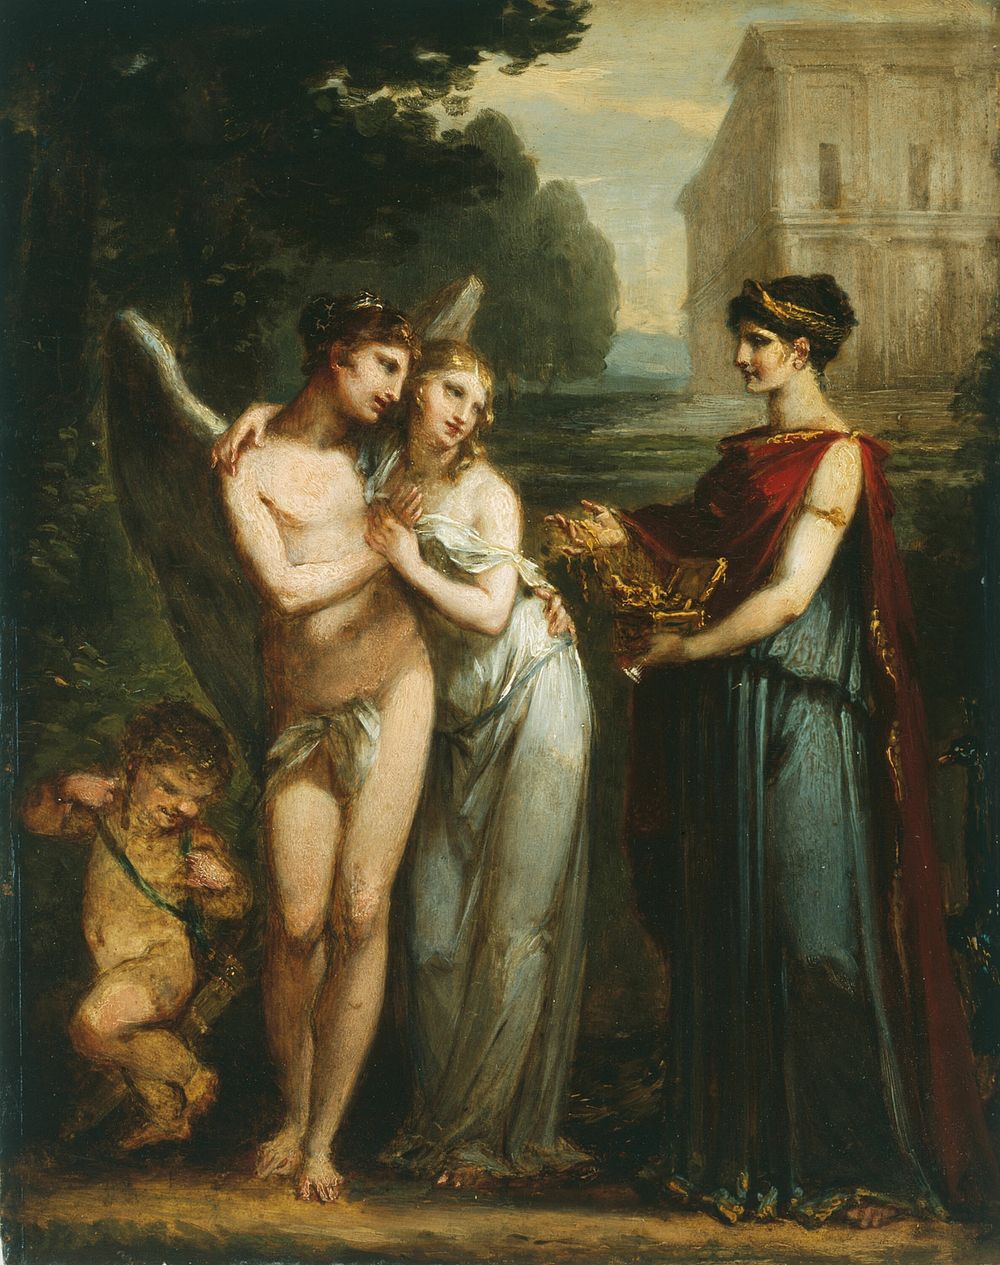 Innocence Prefers Love to Riches by Pierre Paul Prud'hon